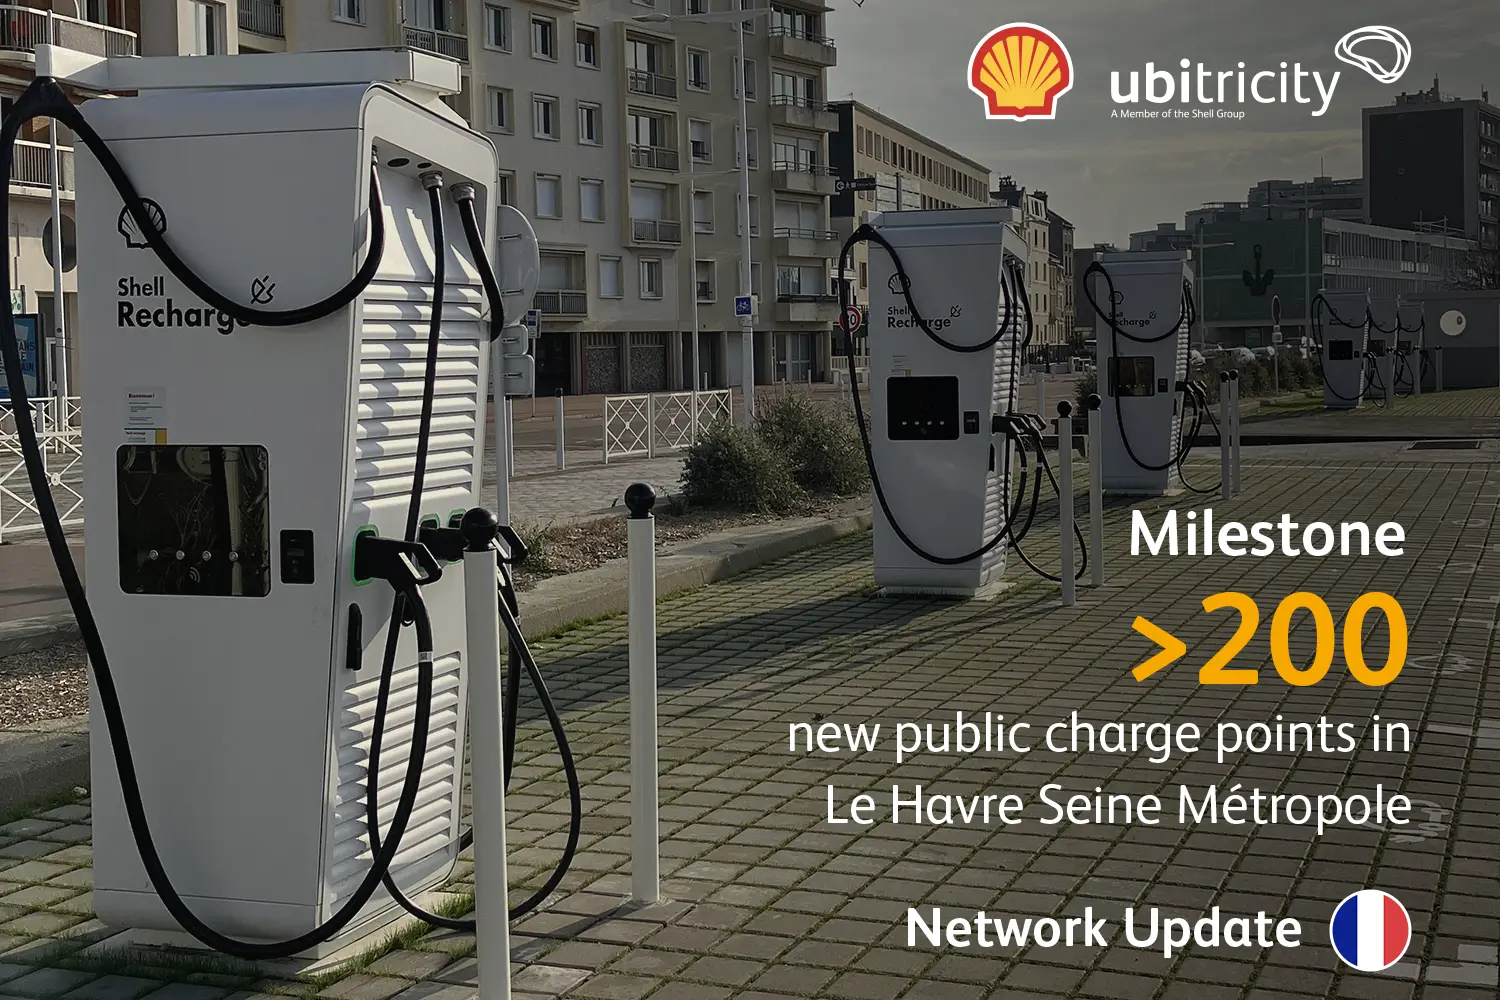 Shell ubitricity hits milestone of more than 200 new public charge points in Le Havre Seine Métropole as part of ongoing expansion.